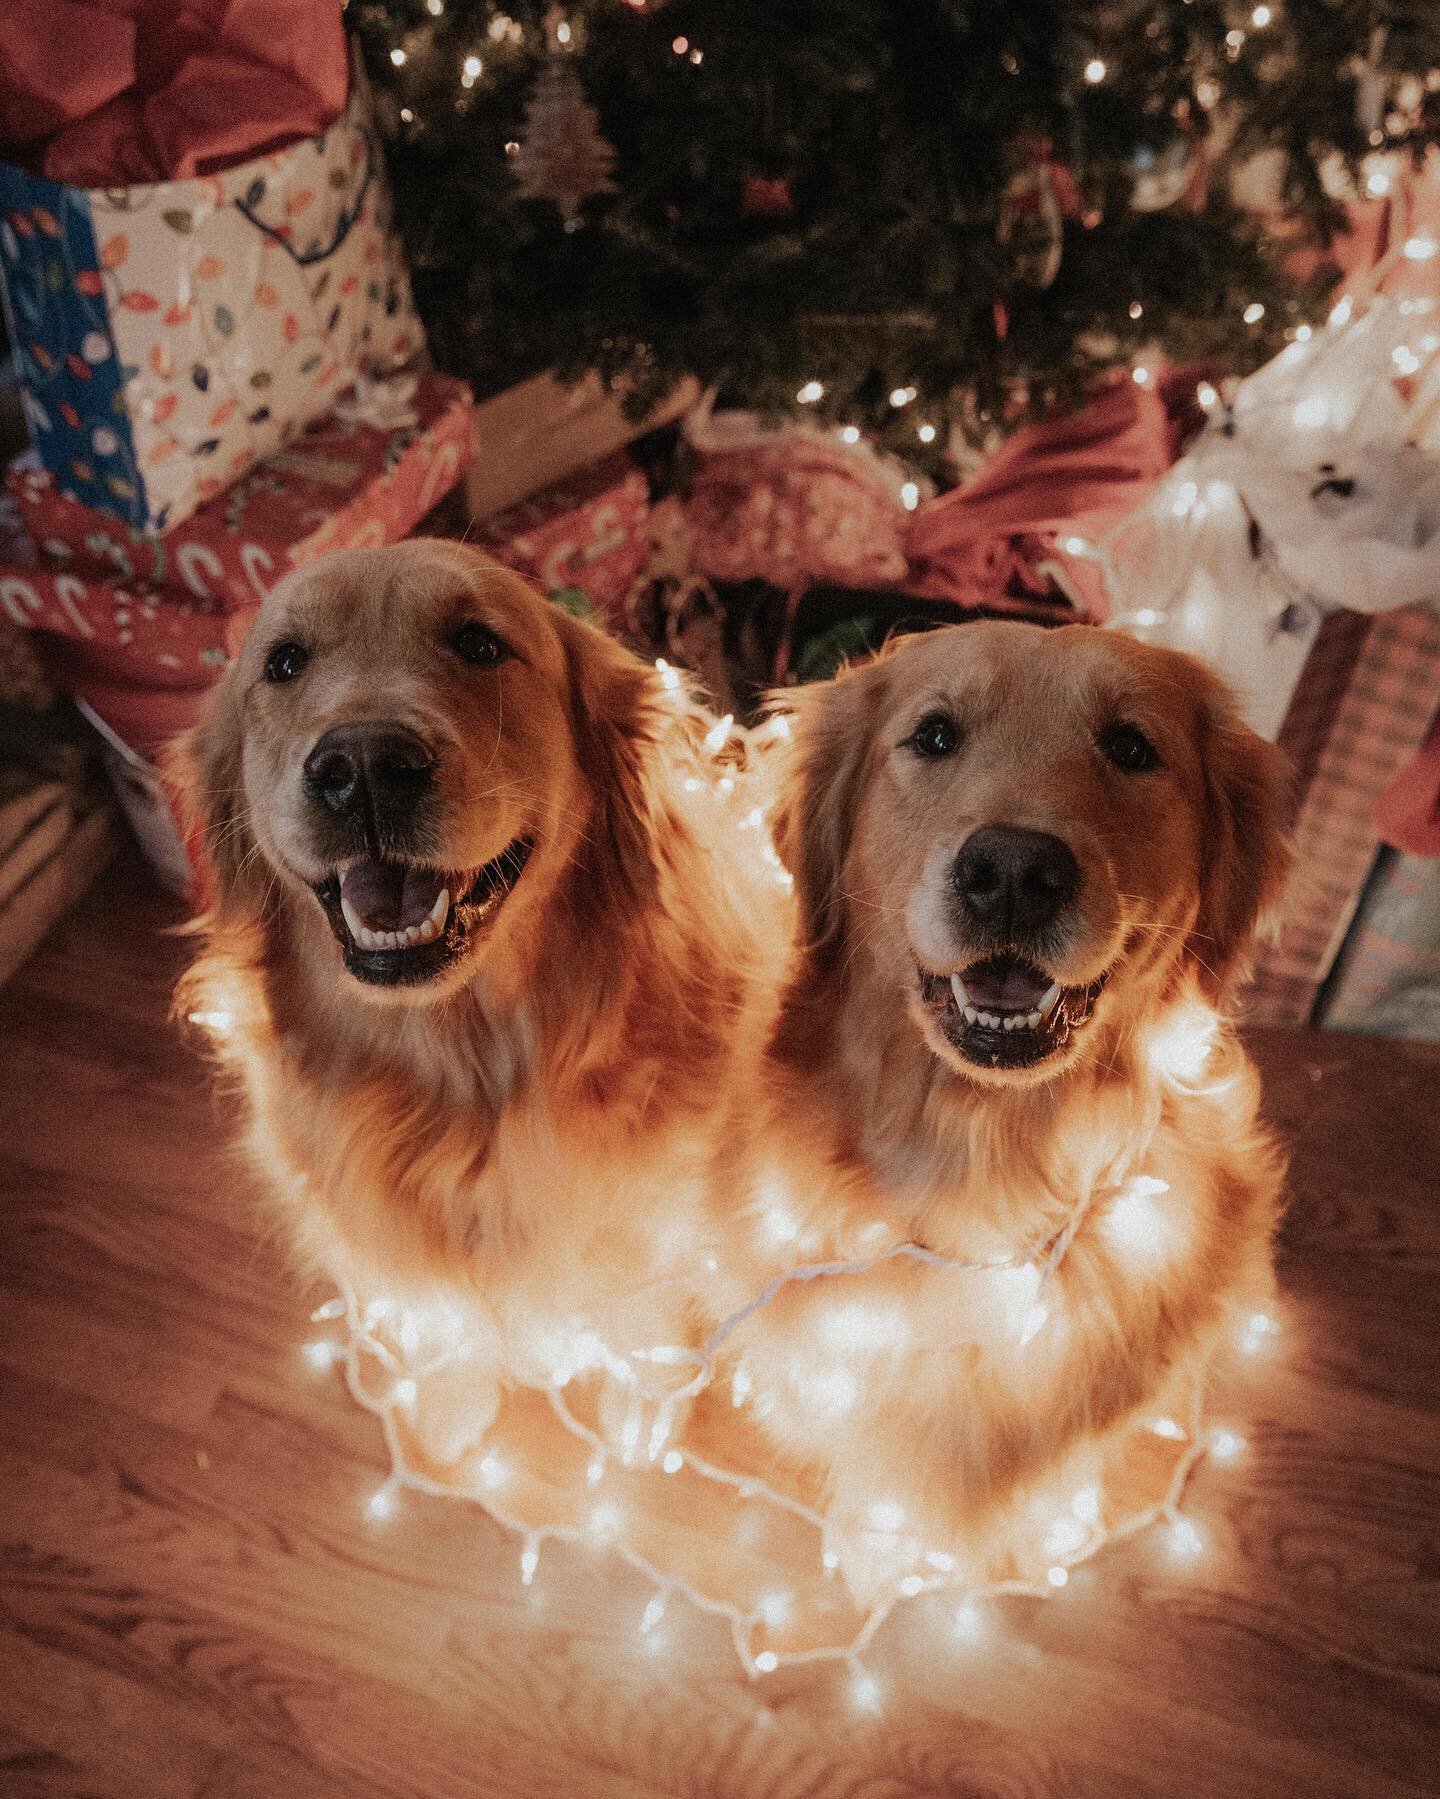 Happy Christmas Eve Eve from these Christmas pups! 🎄✨🐾